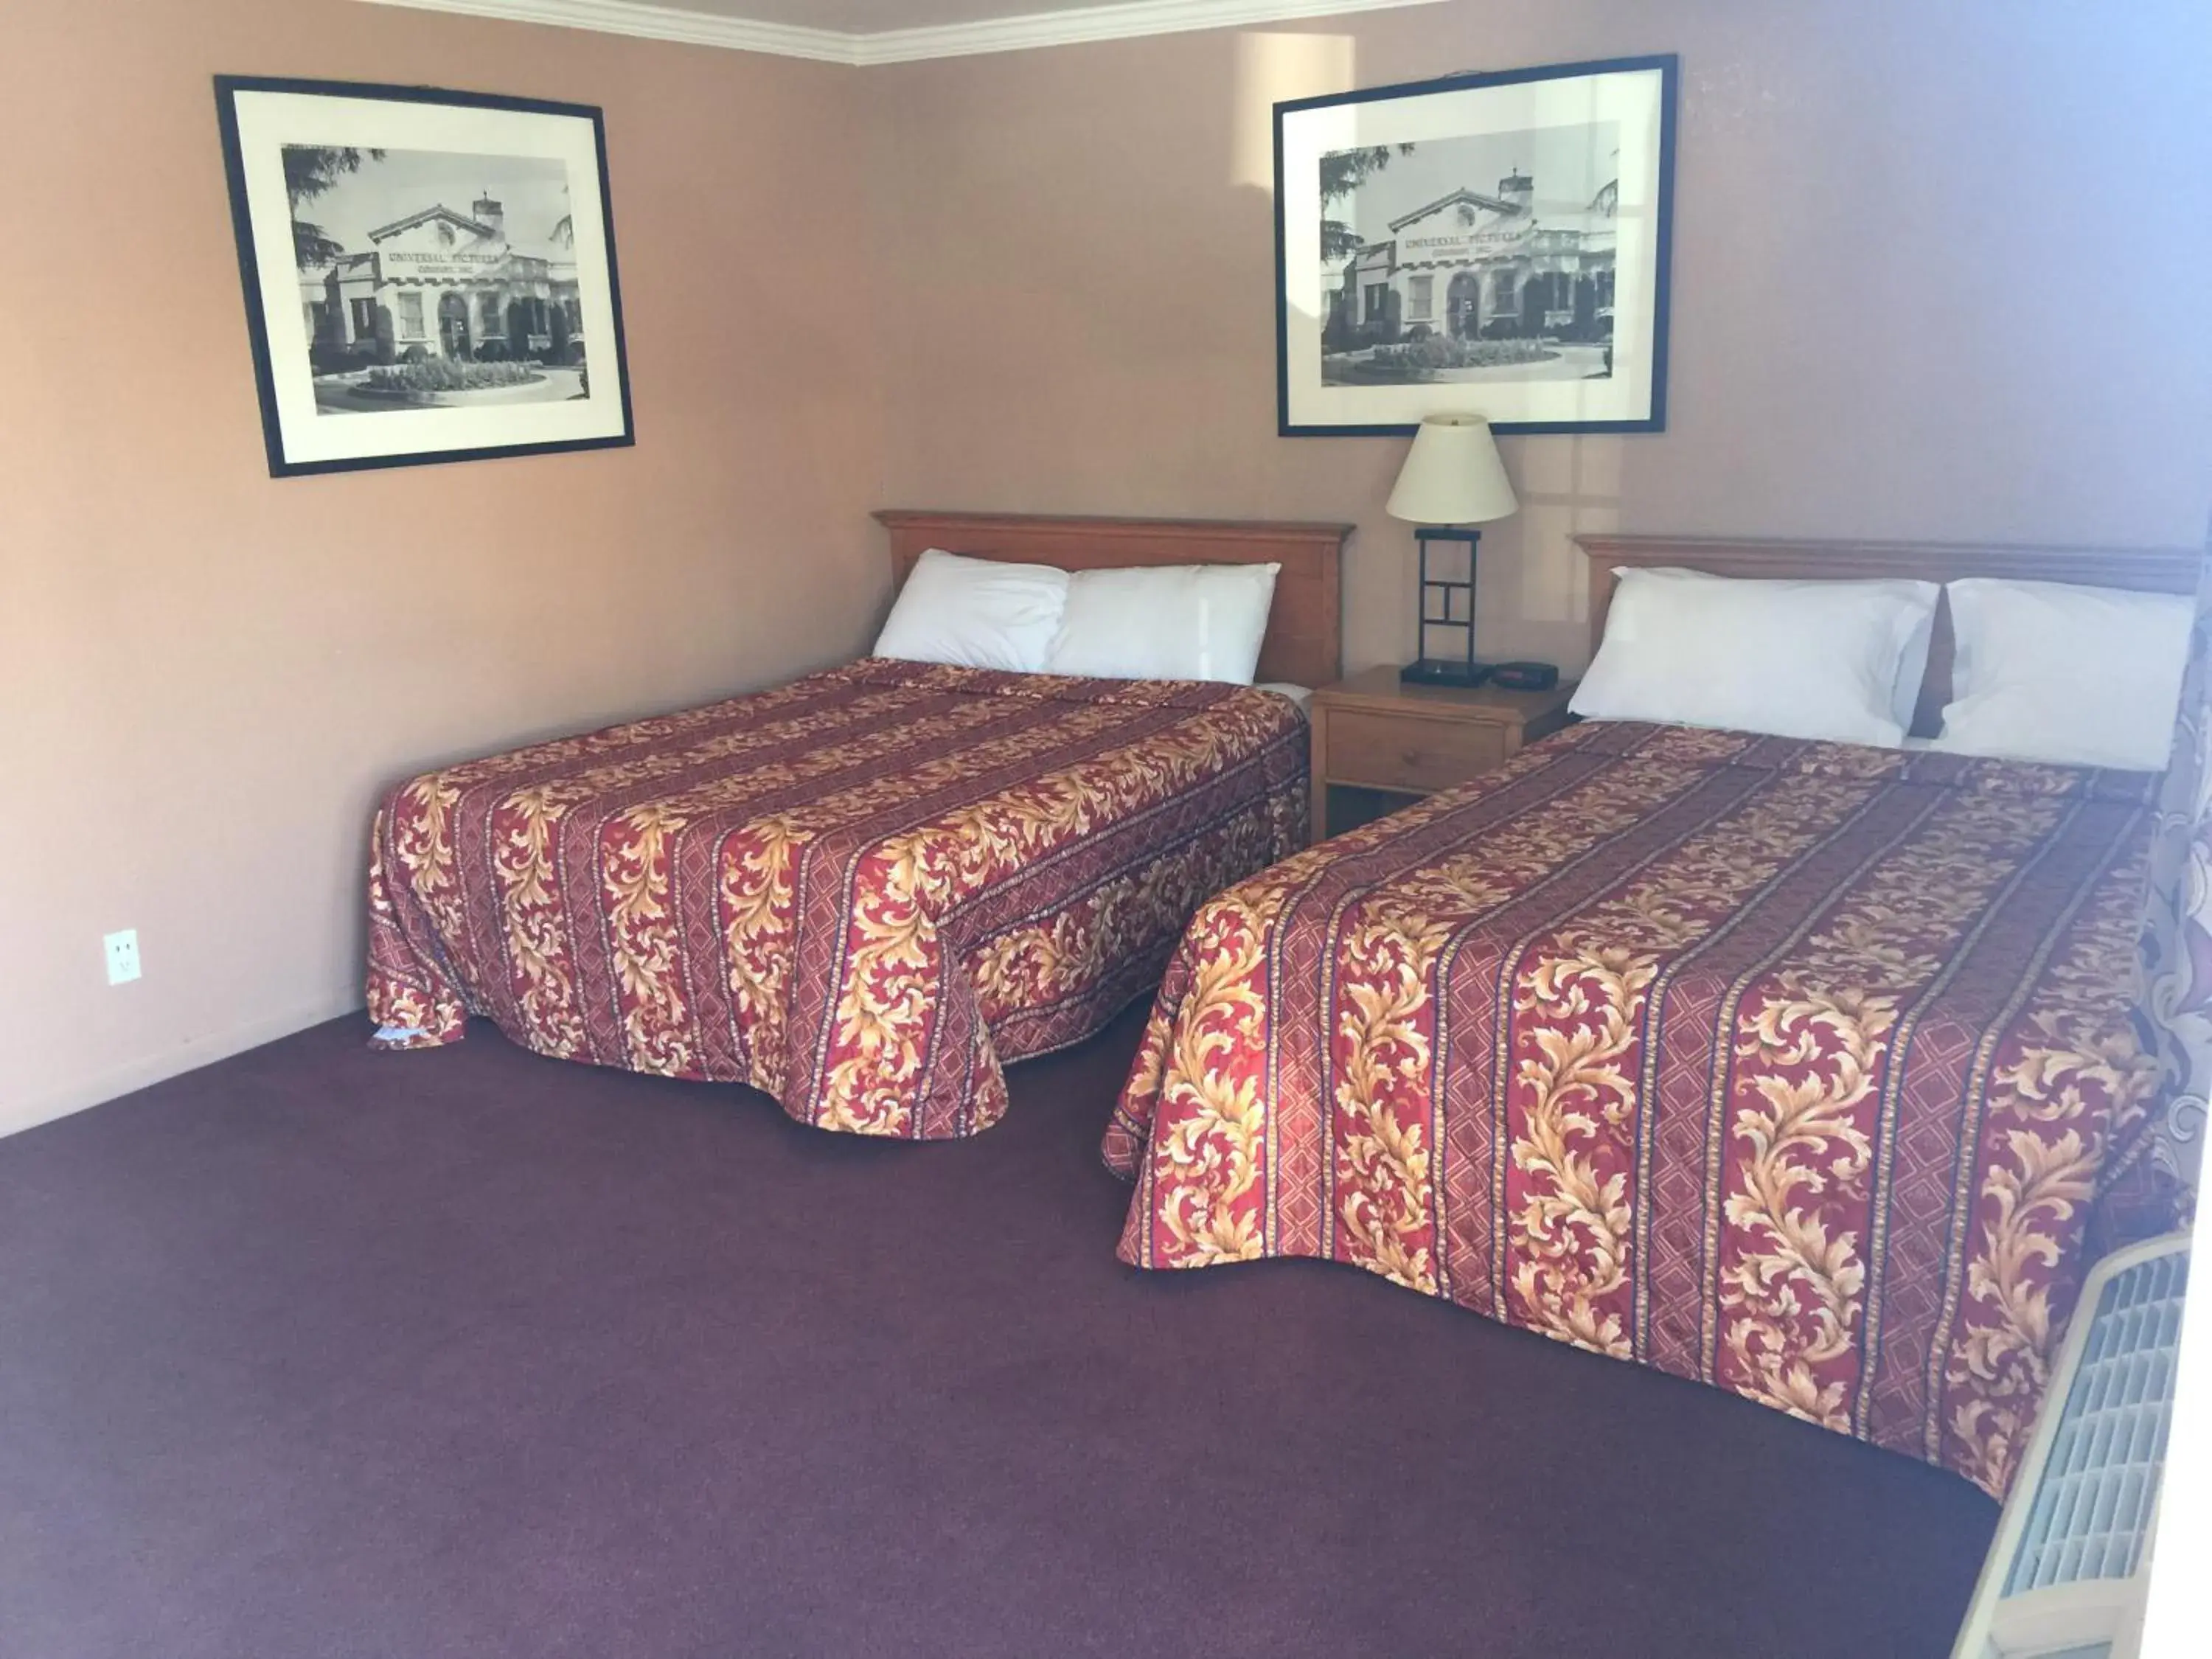 Bed in Mission Motel